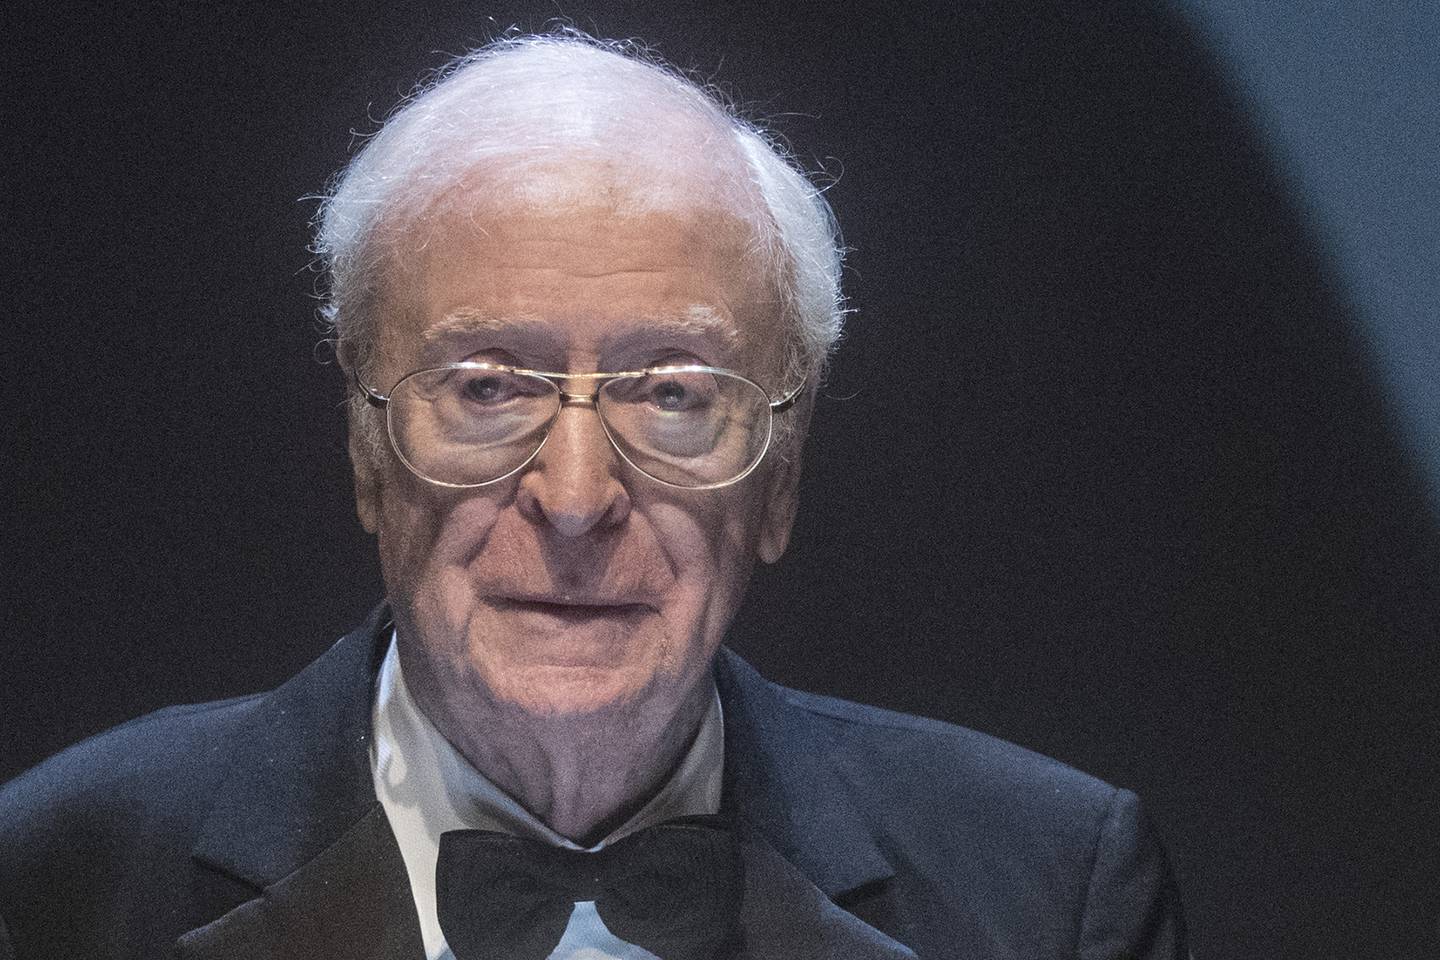 In recent years, Michael Caine has worked with Christian Bale and Leonardo DiCaprio. AFP